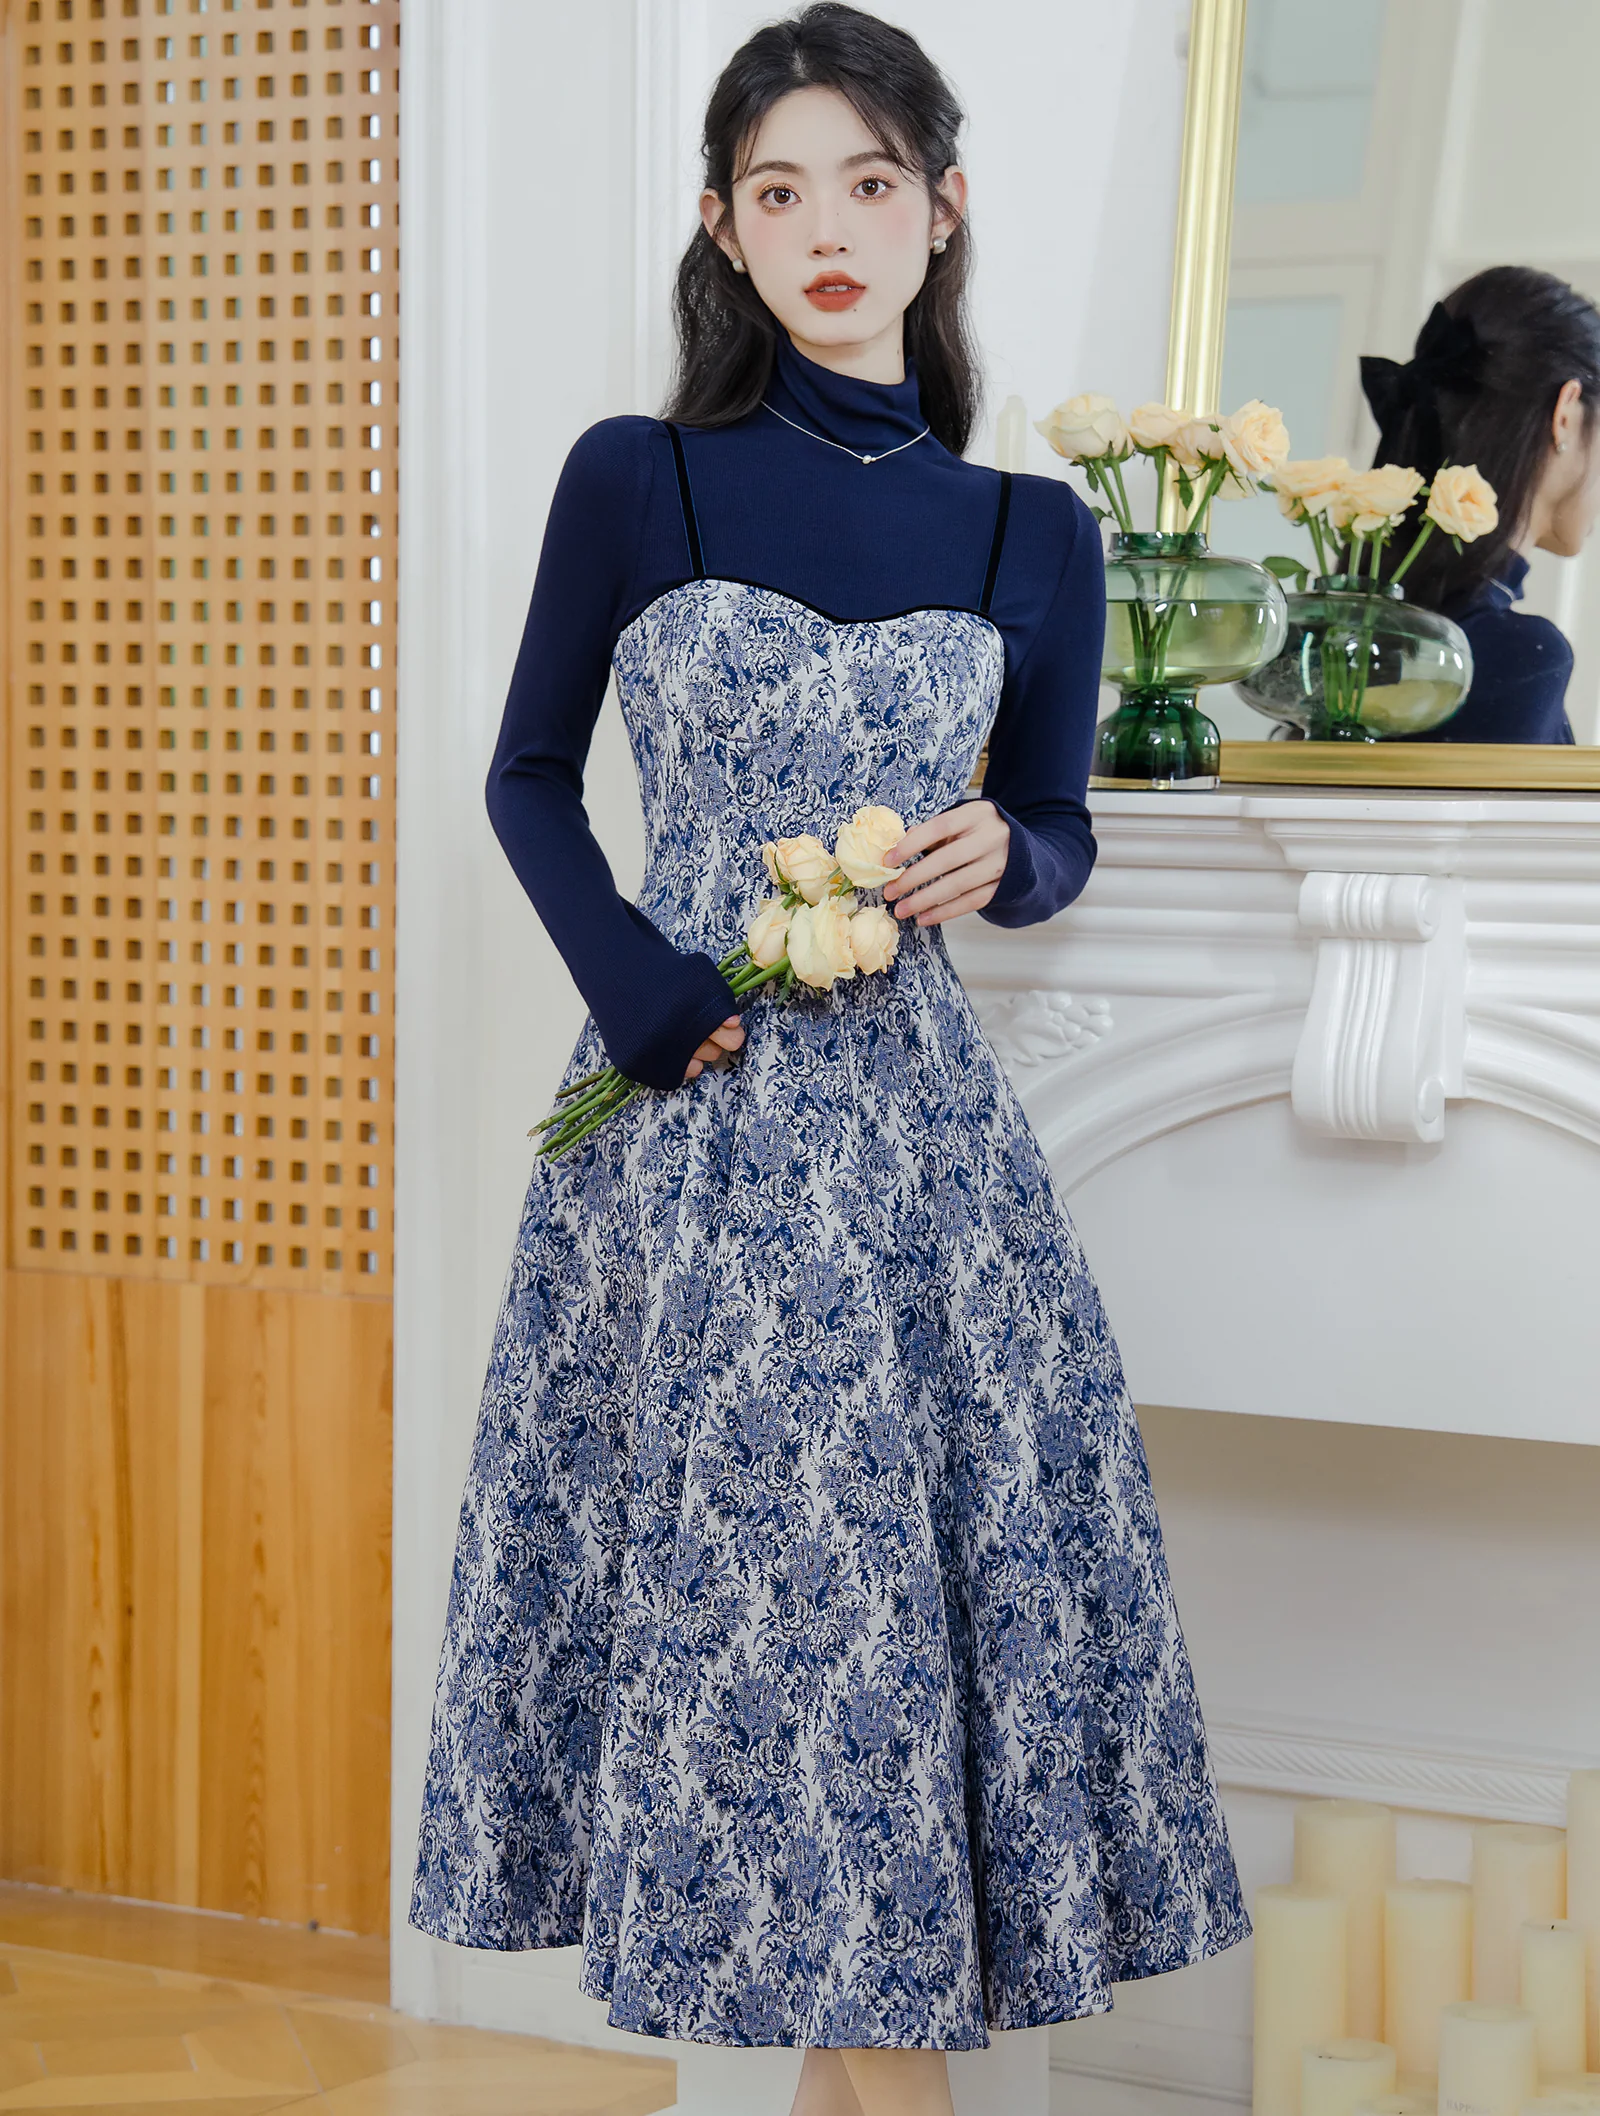 Sweet Blue Turtleneck Knit Sweater with Thick Floral Slip Dress Suit01